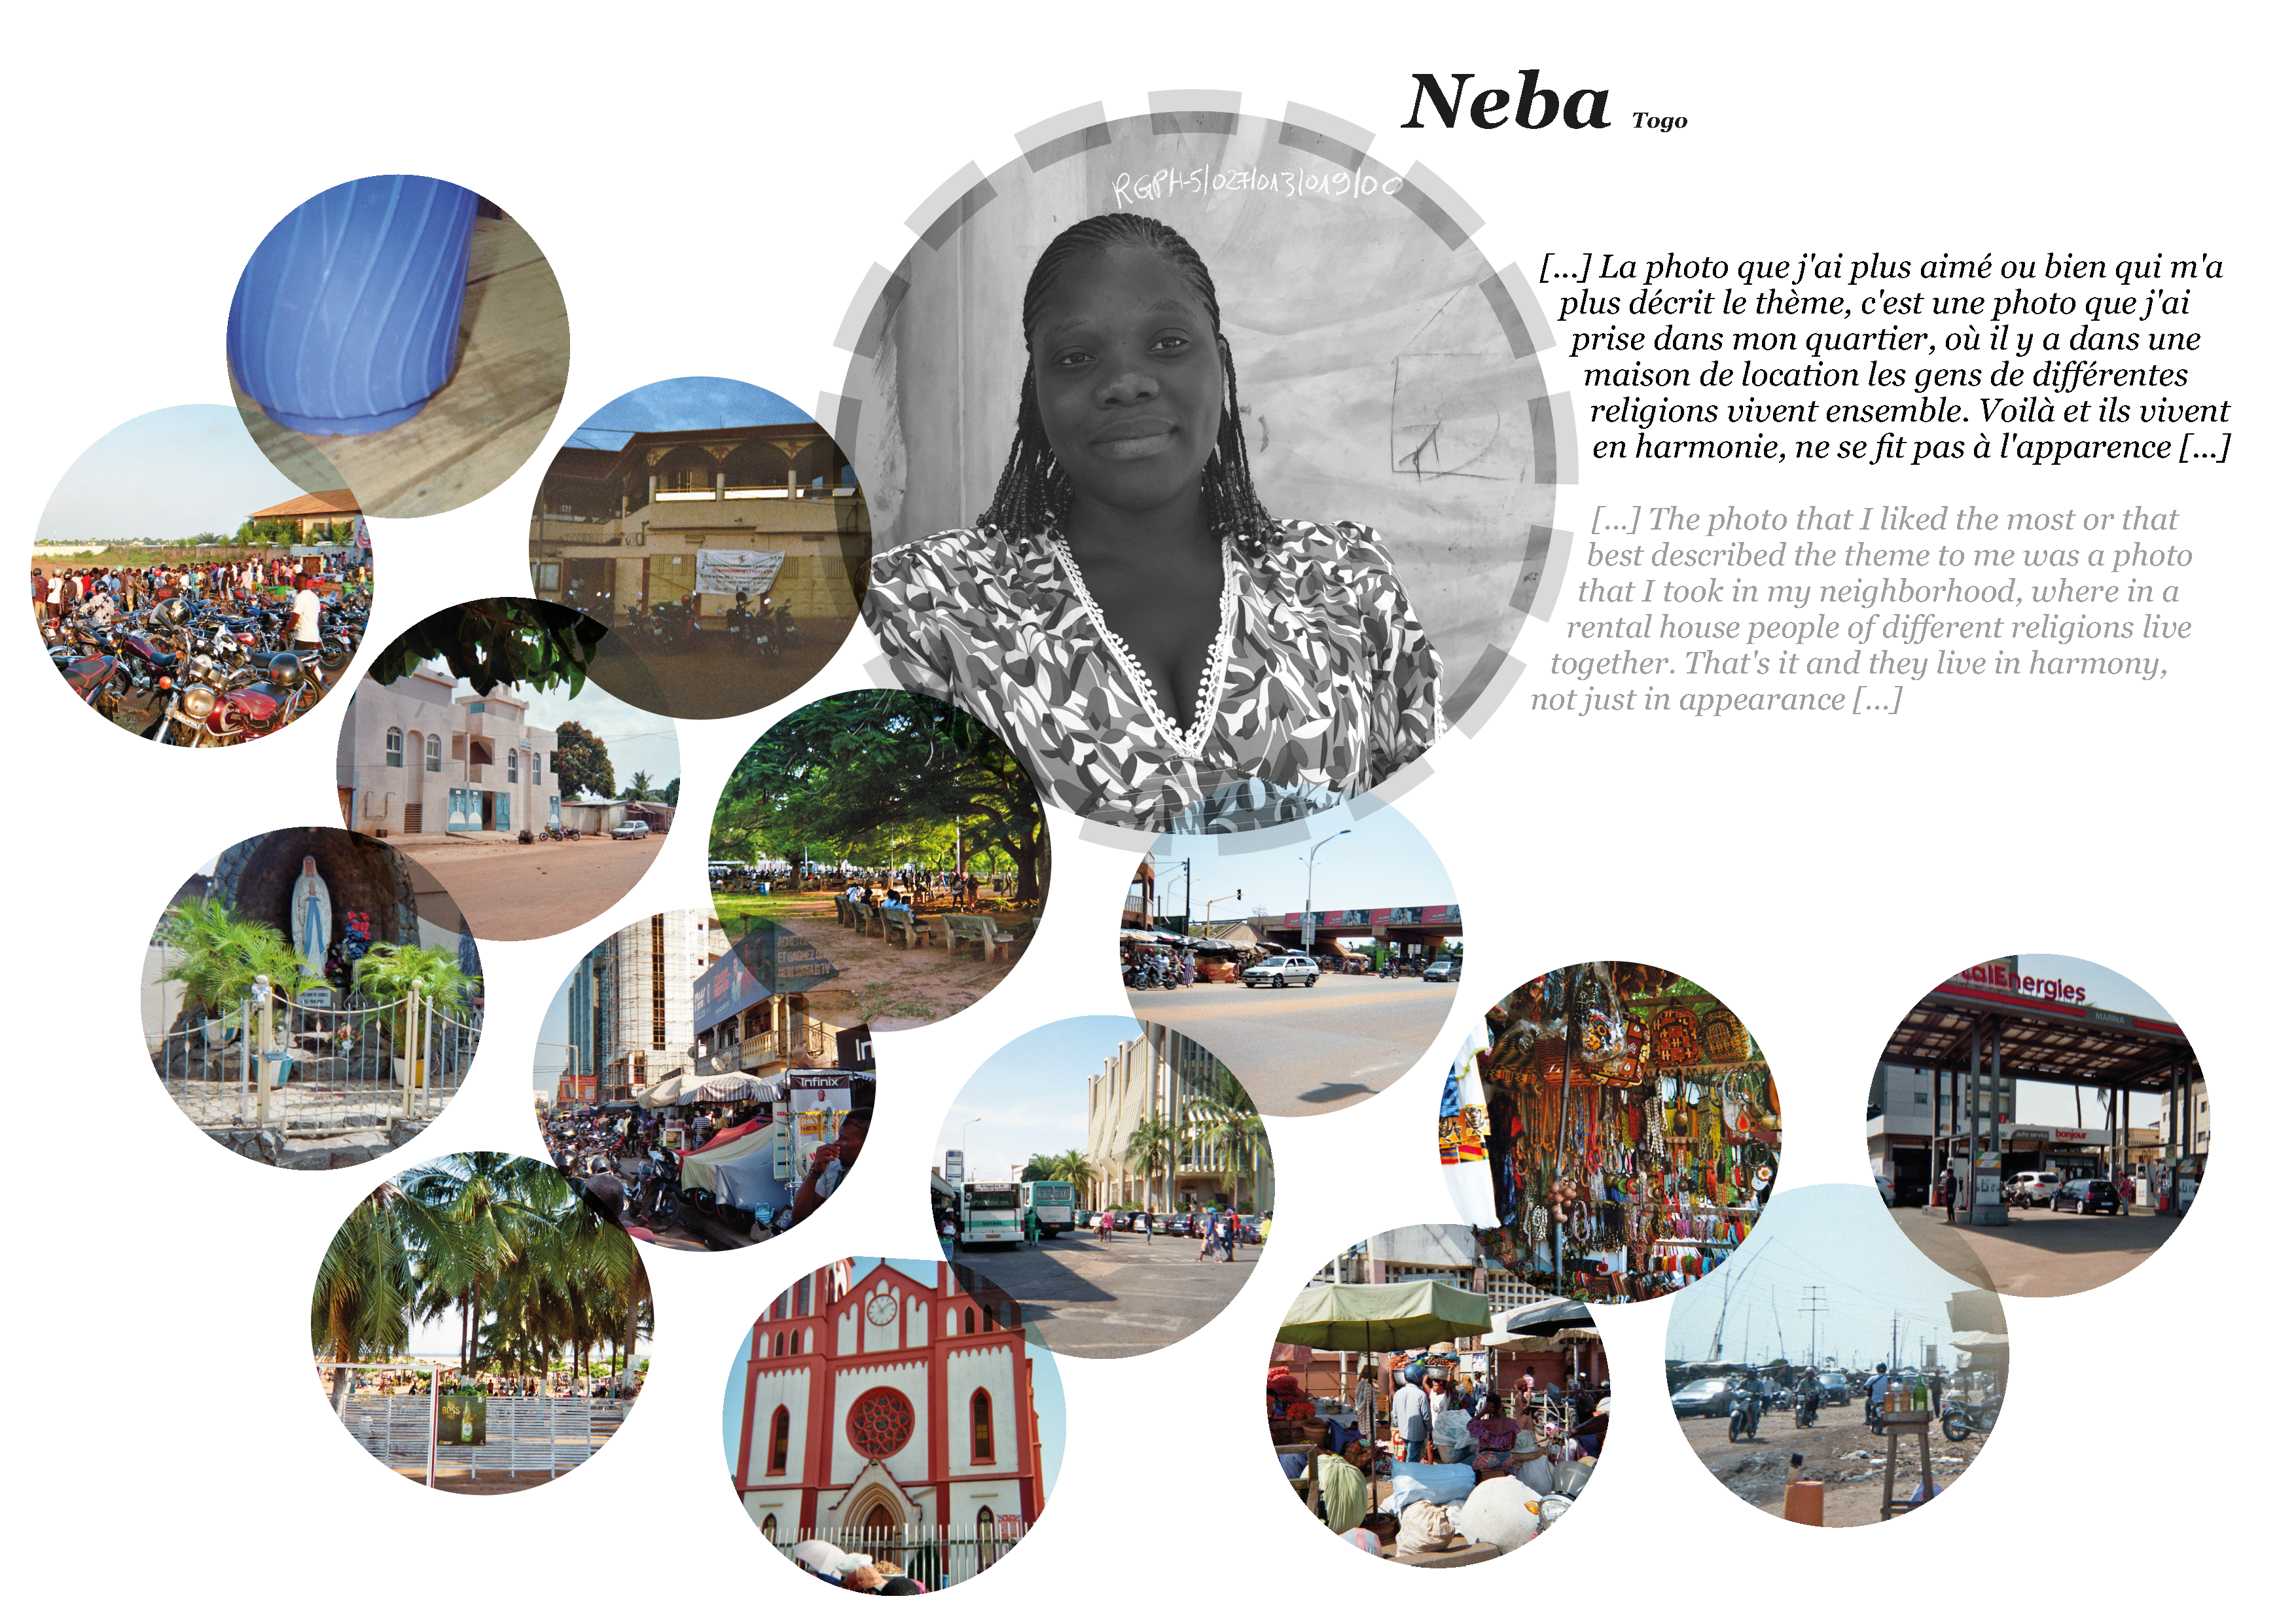 Collage of pictures of religion and peace by Neba in Togo